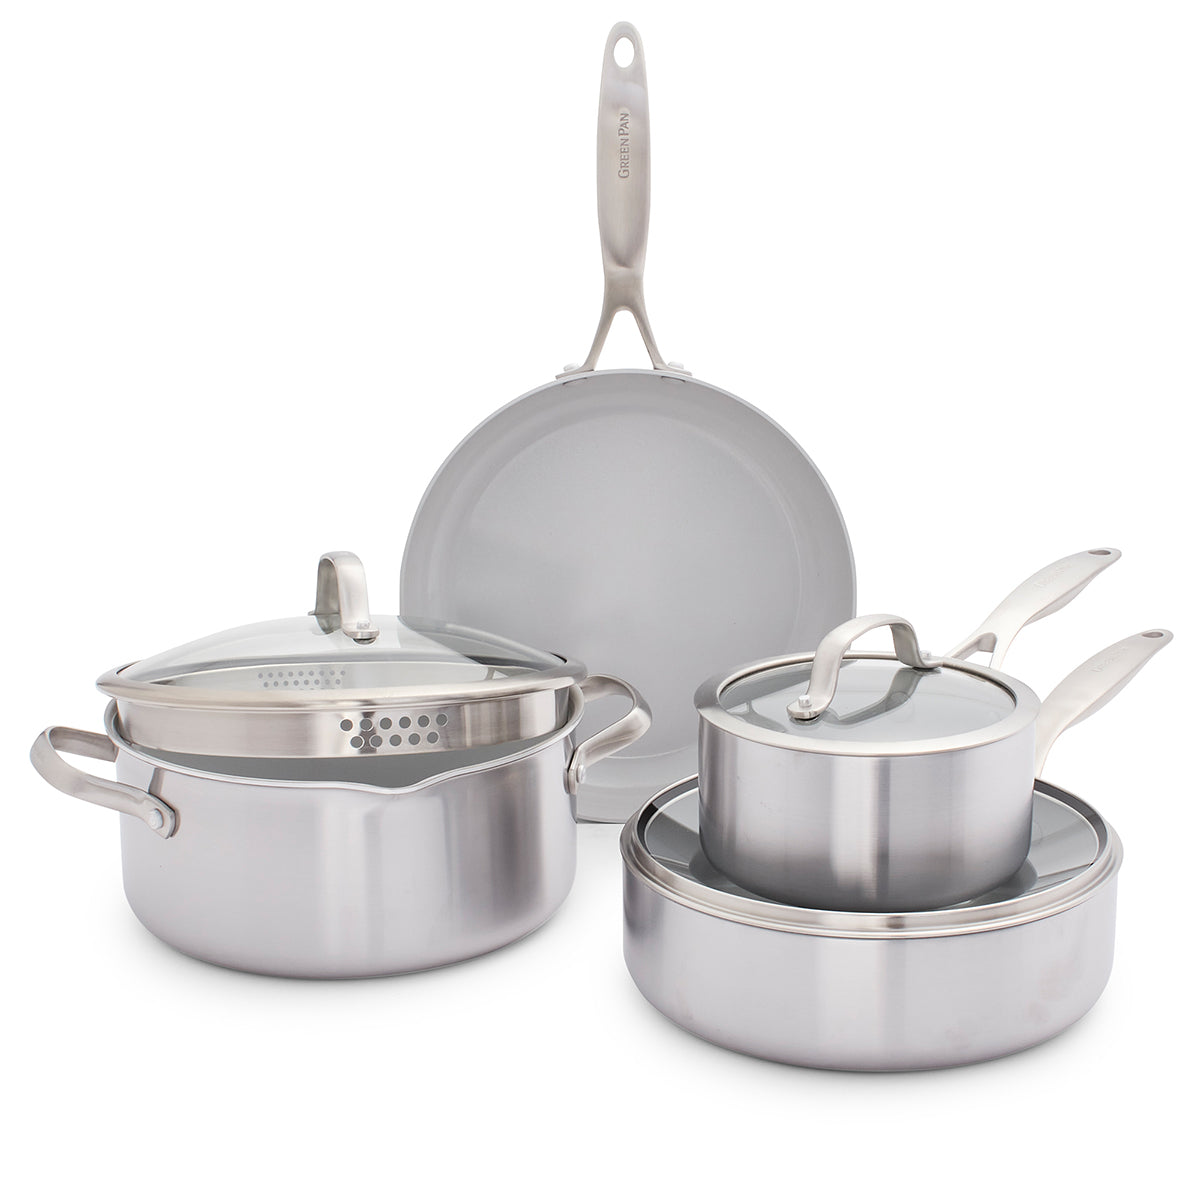 GreenLife Tri-Ply Stainless Steel Healthy Ceramic Nonstick, 10 Piece  Cookware Pots and Pans Set, PFAS-Free, Multi Clad, Induction, Dishwasher  Safe